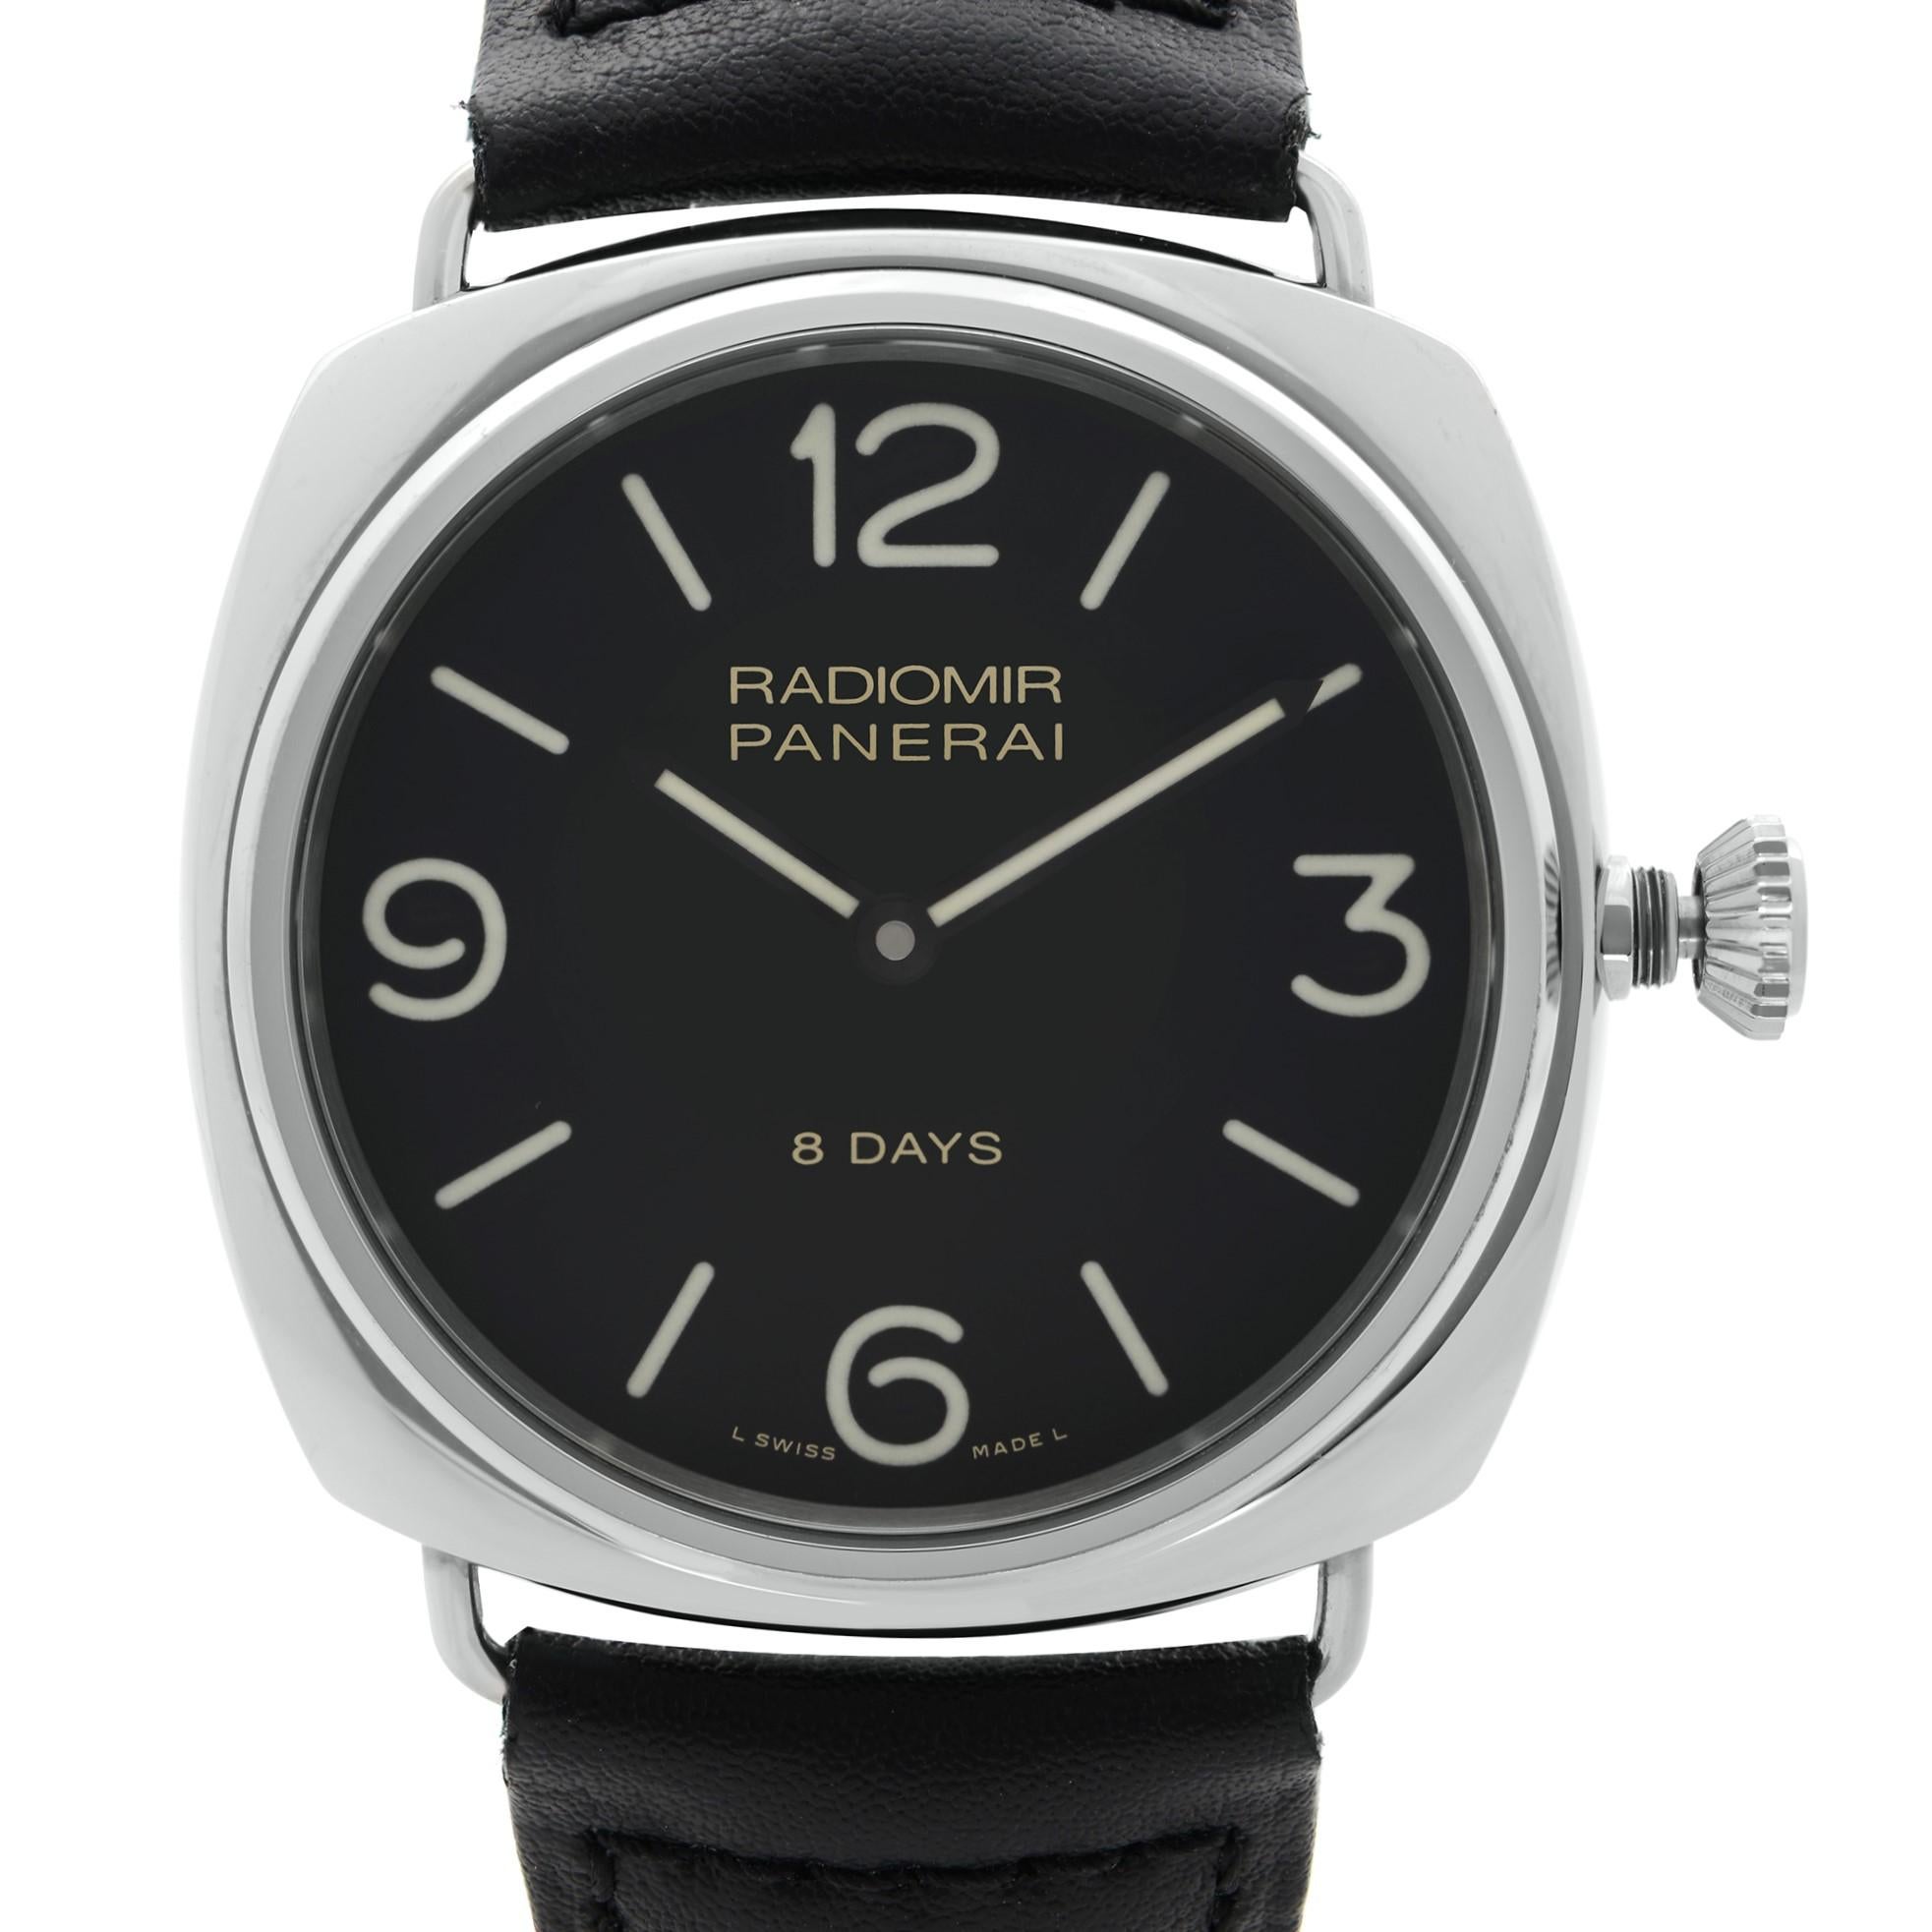 Pre-owned Panerai Radiomir 8 Days Stainless Steel Black Dial Hand Wind Men's Watch PAM00610.  The Watch Band Straps Show Moderate Wrinkles. No Original Box and Papers are Included. Comes with Chronostore Presentation Box and Authenticity Card.